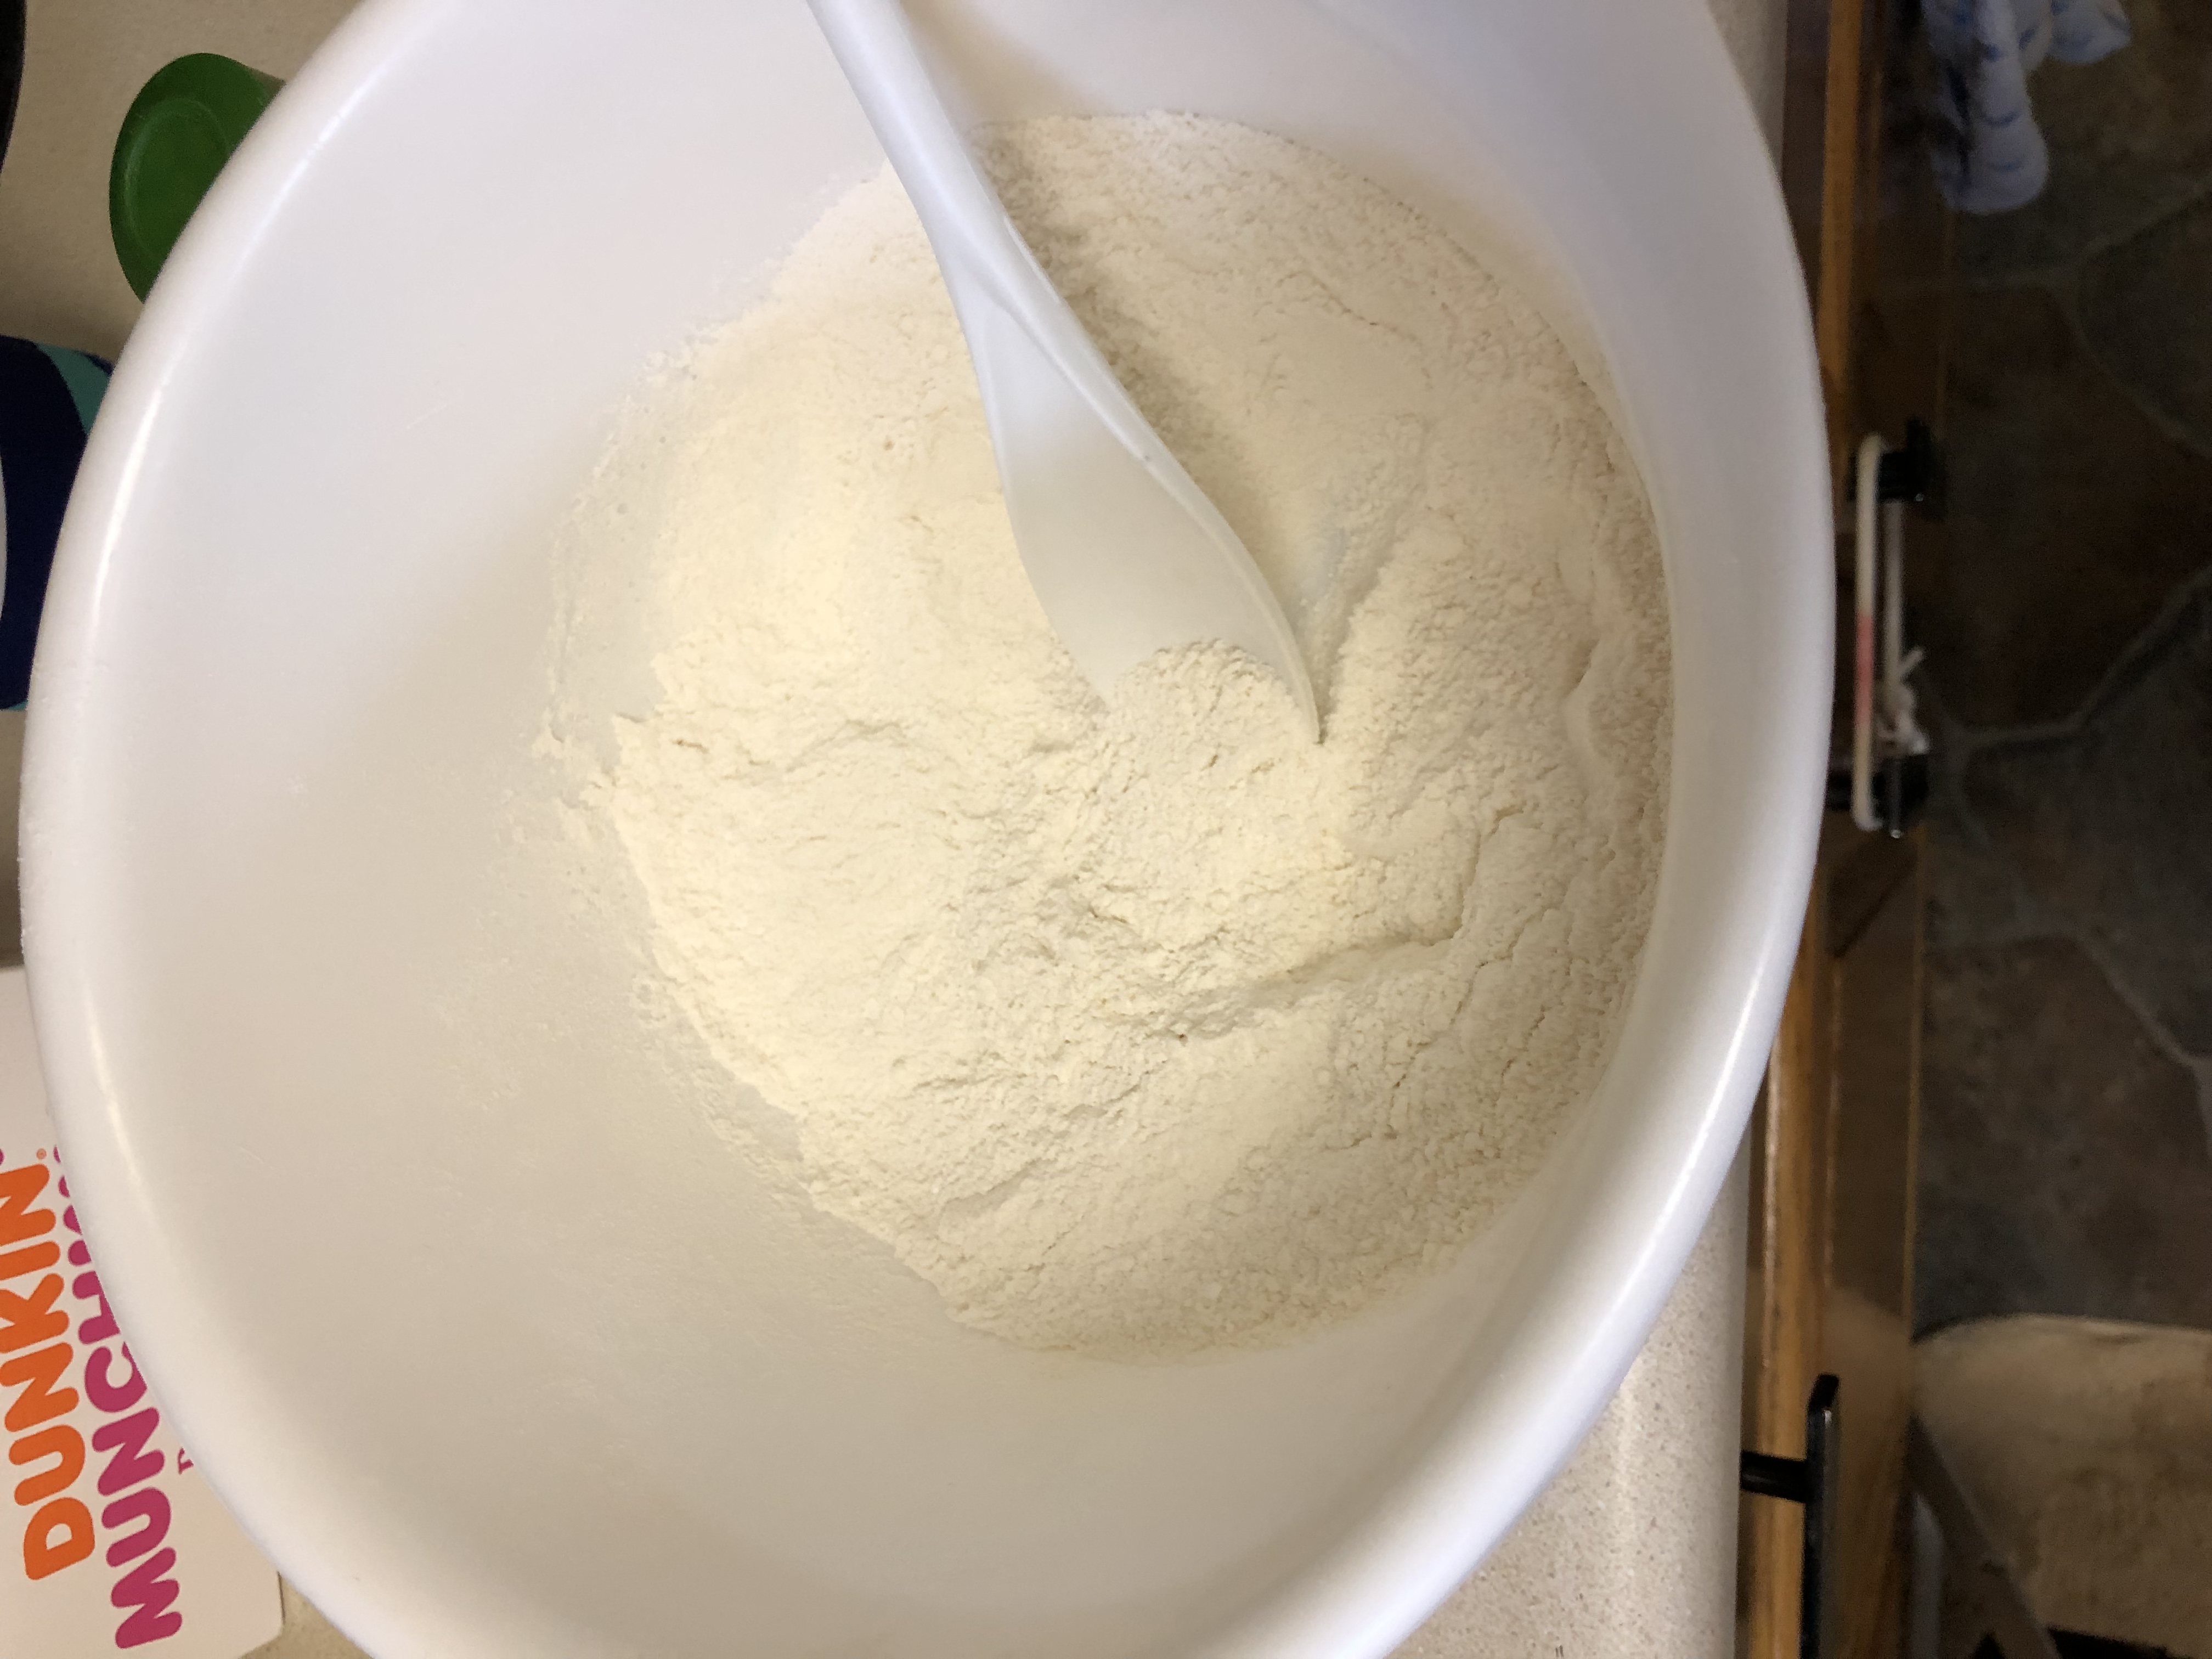 The dry ingredients in a mixing bowl